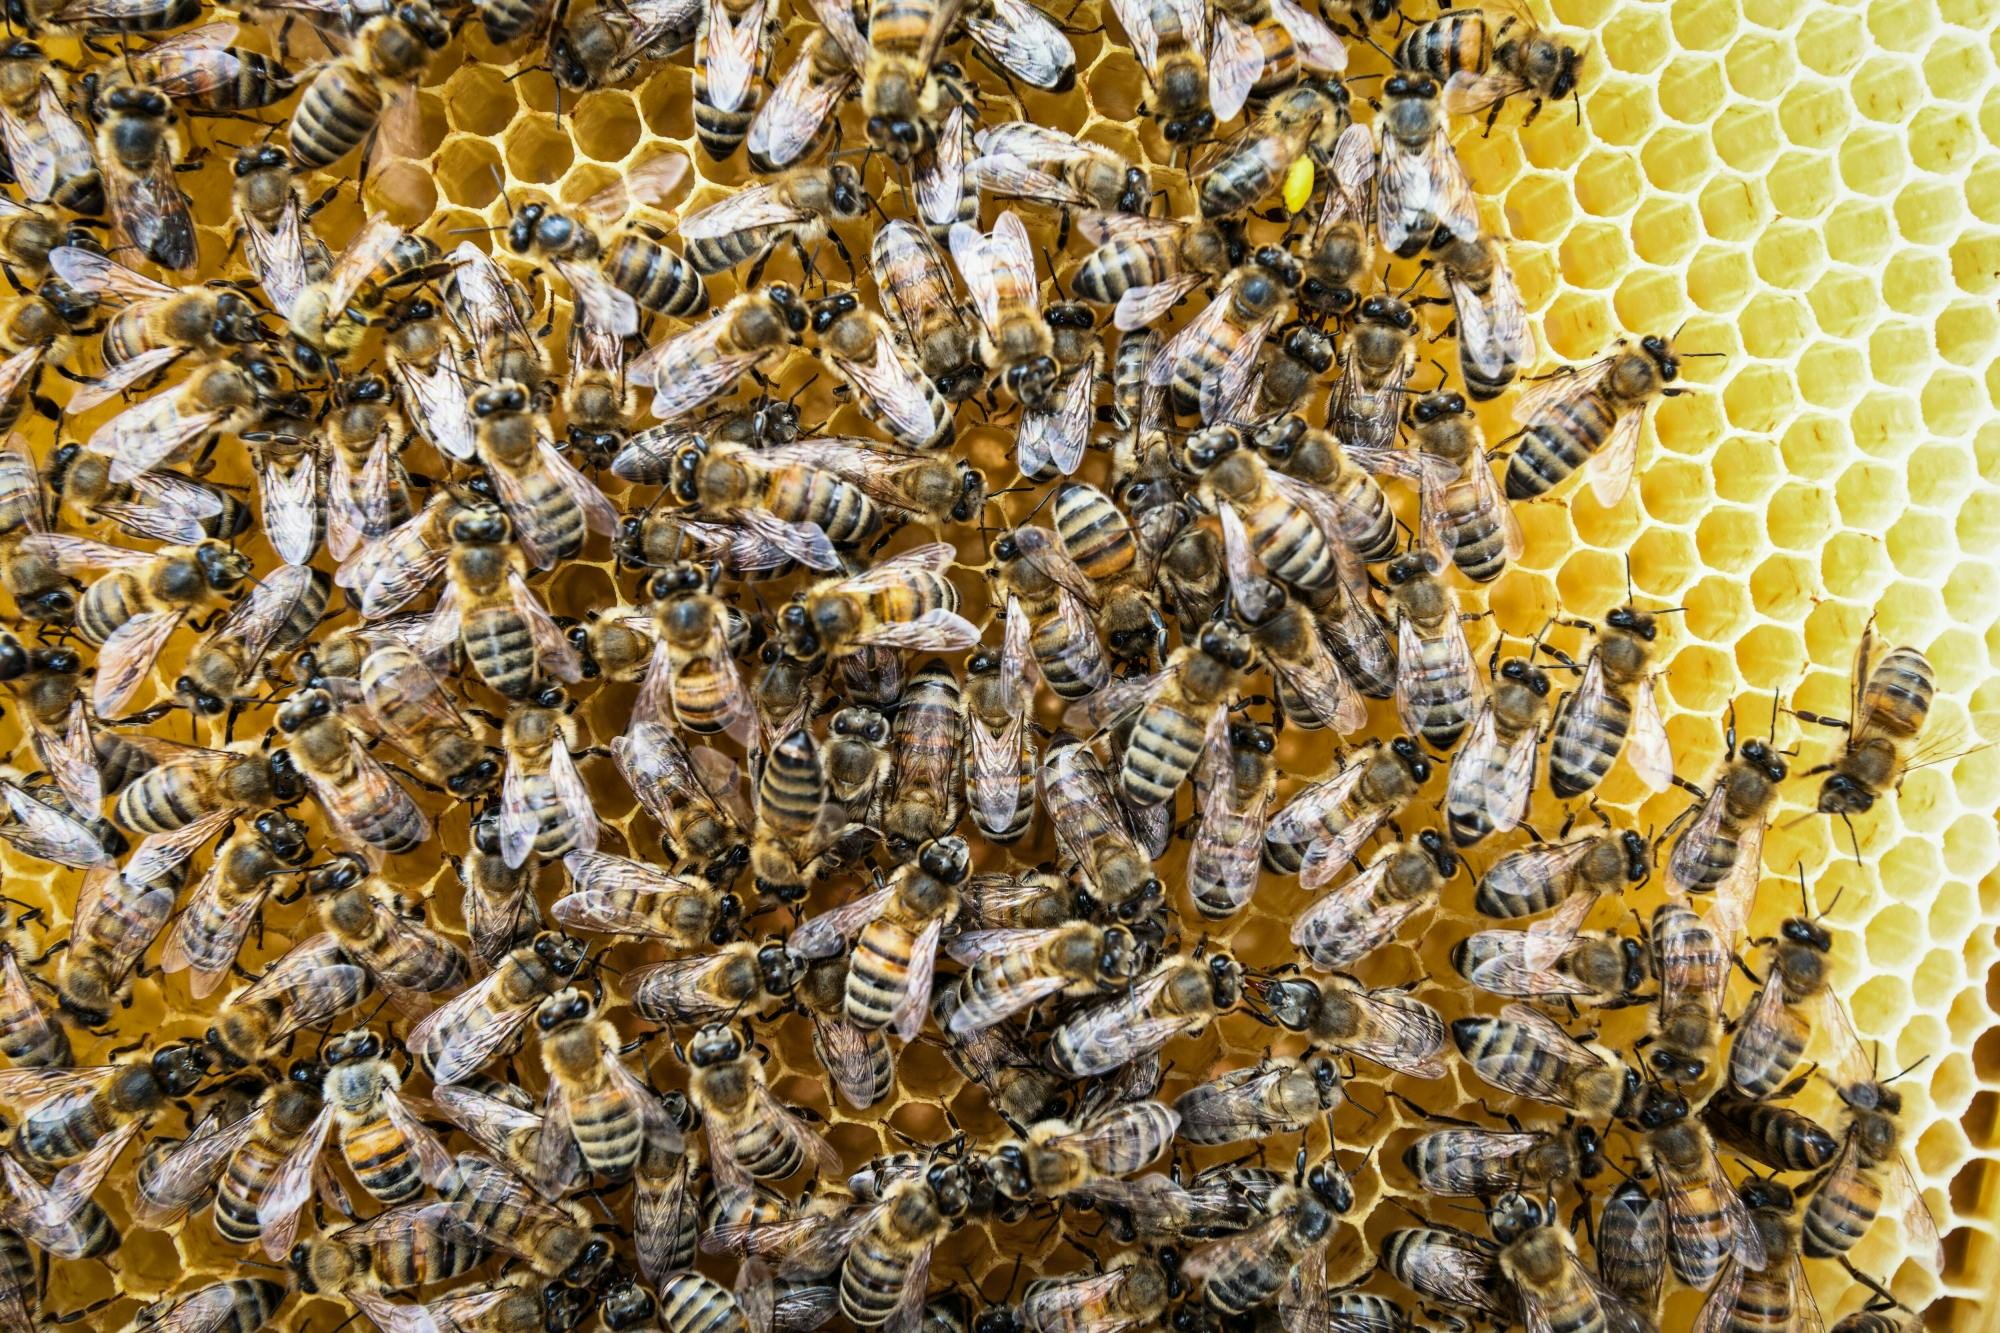 Nat Geo Day Tour: The Fascinating World of Bees